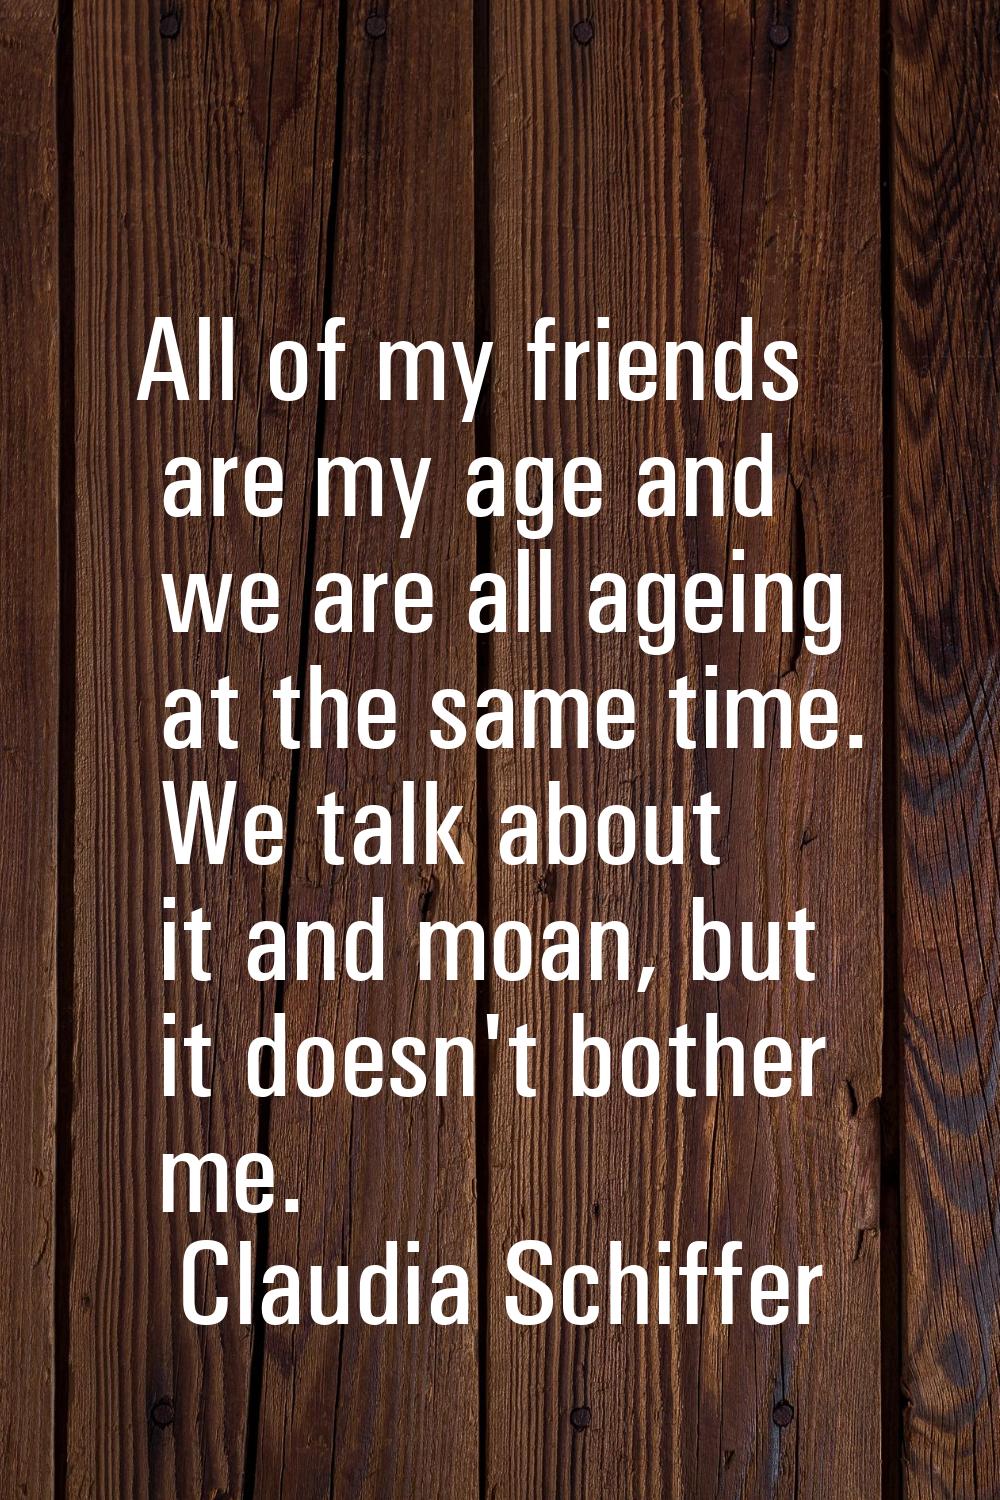 All of my friends are my age and we are all ageing at the same time. We talk about it and moan, but